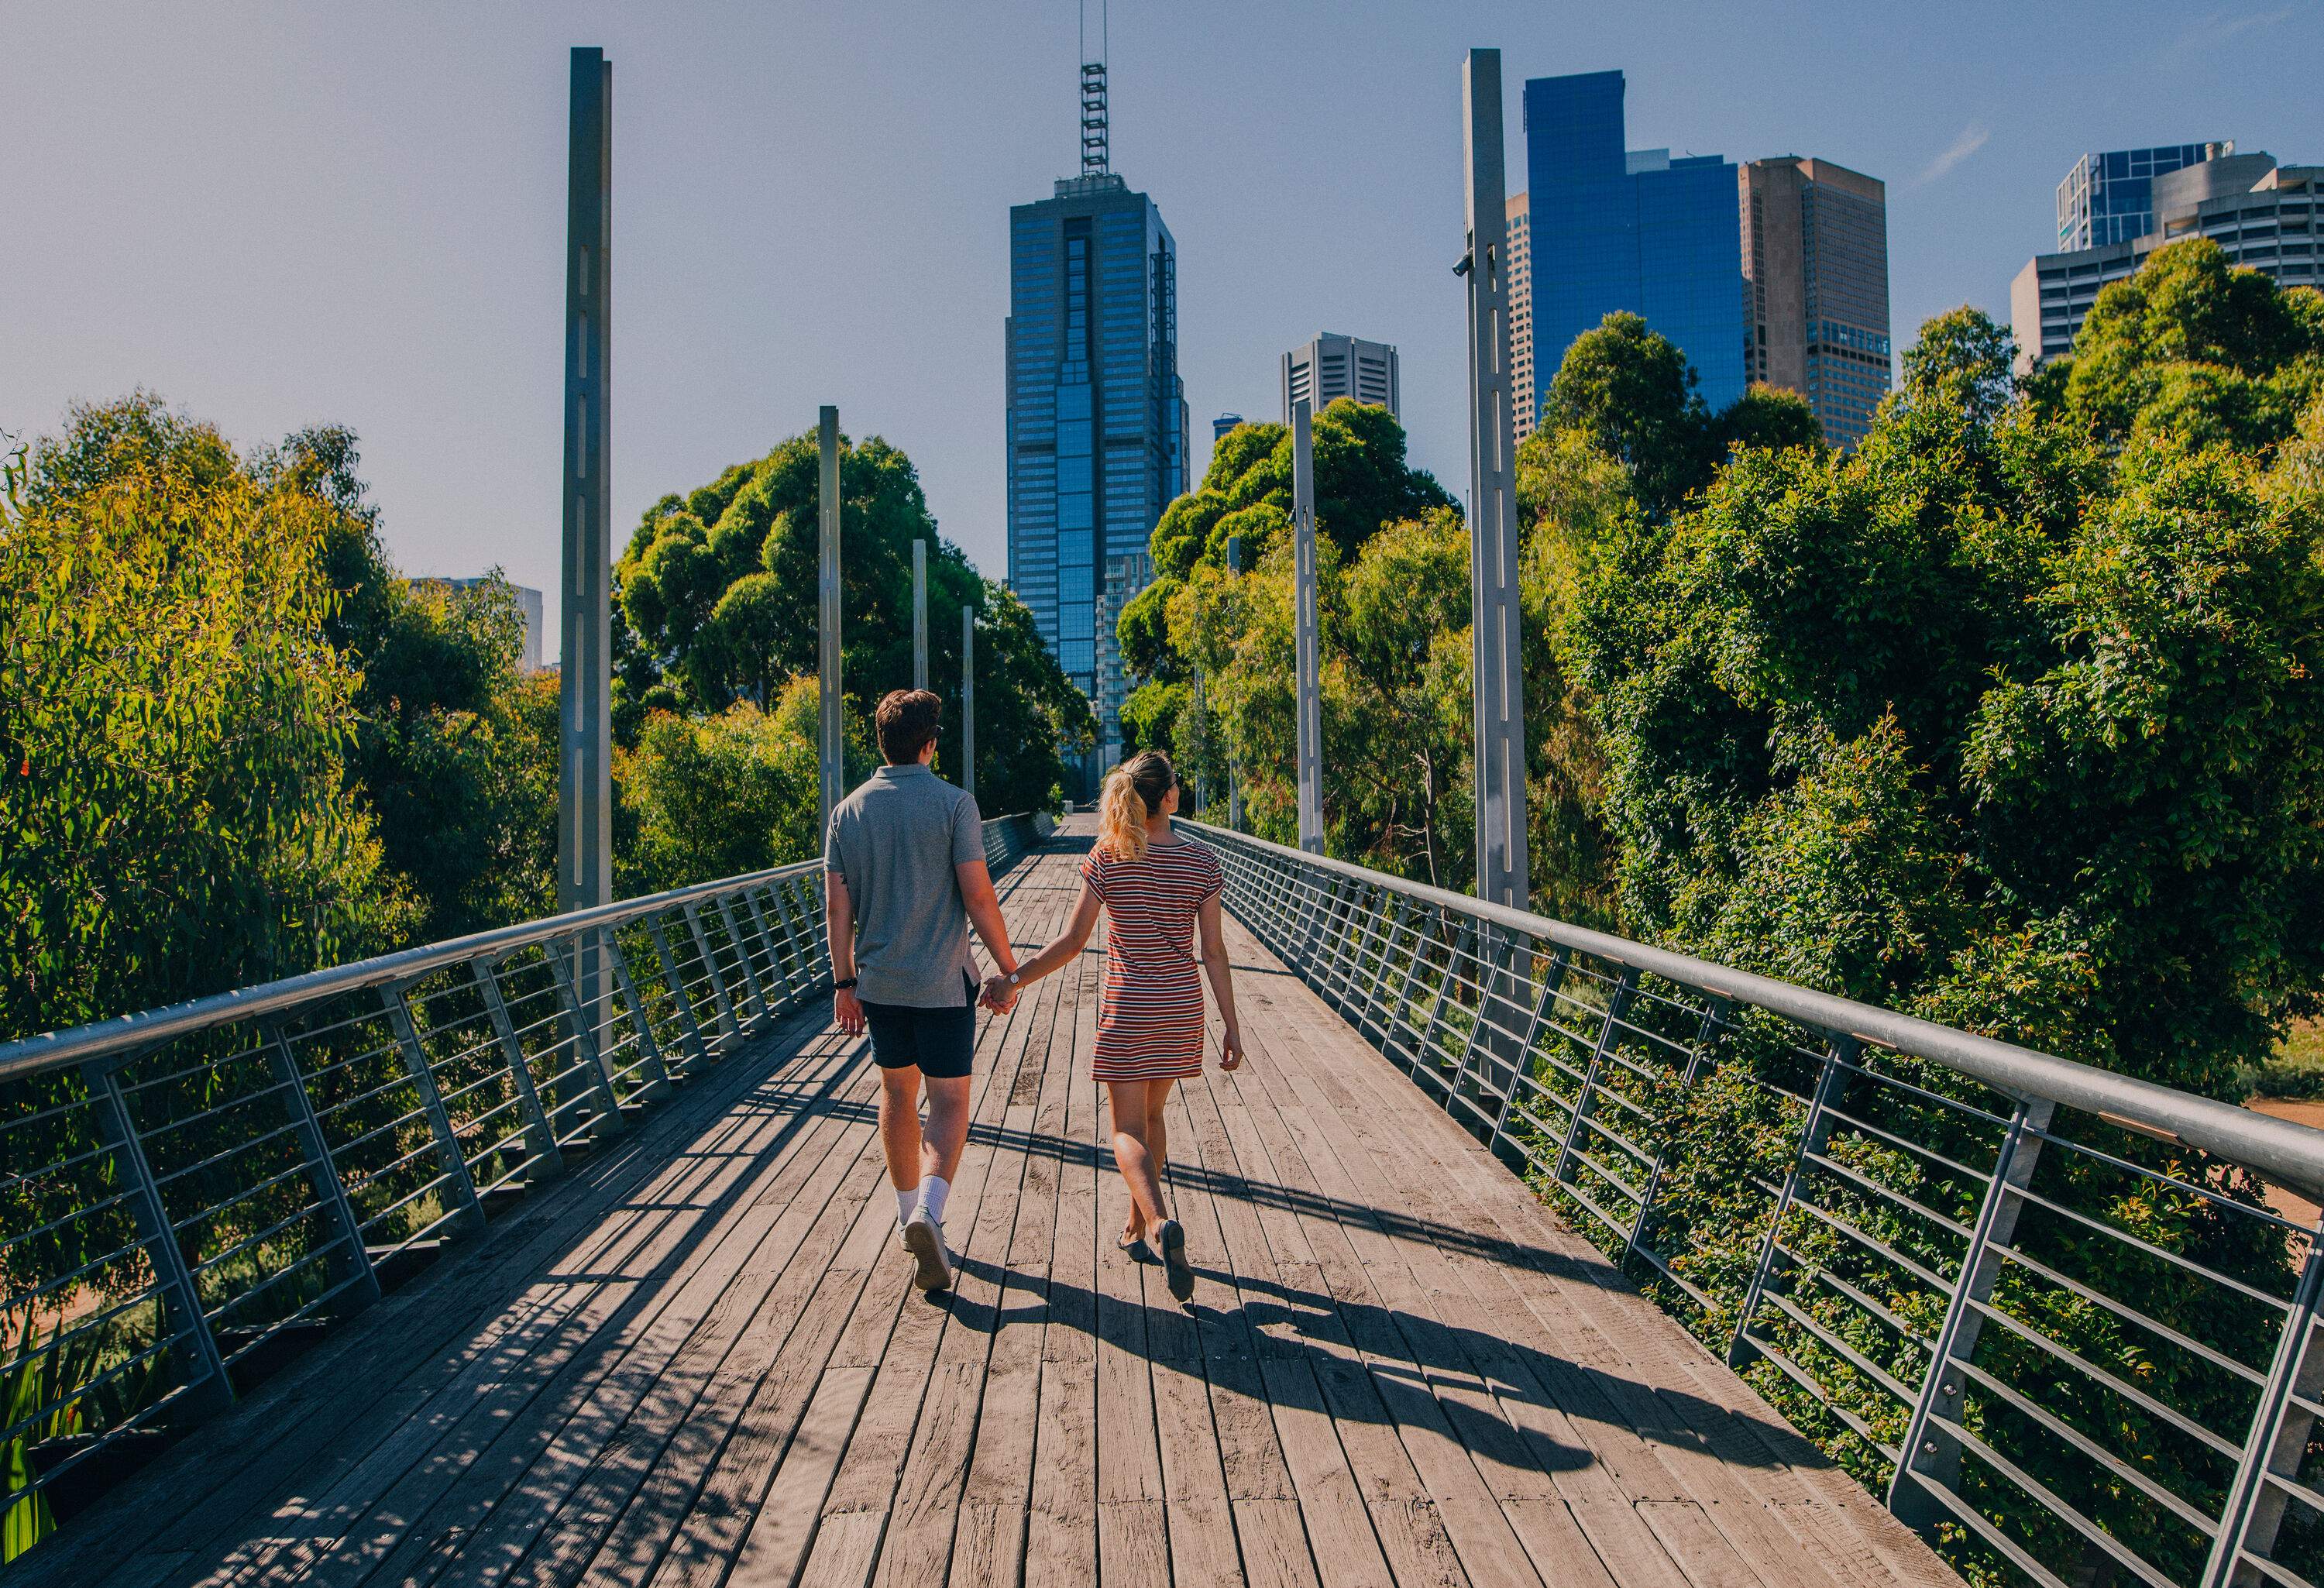 A lovely couple holds hands while walking on a wooden pedestrian bridge between the lush trees heading towards the tall buildings.